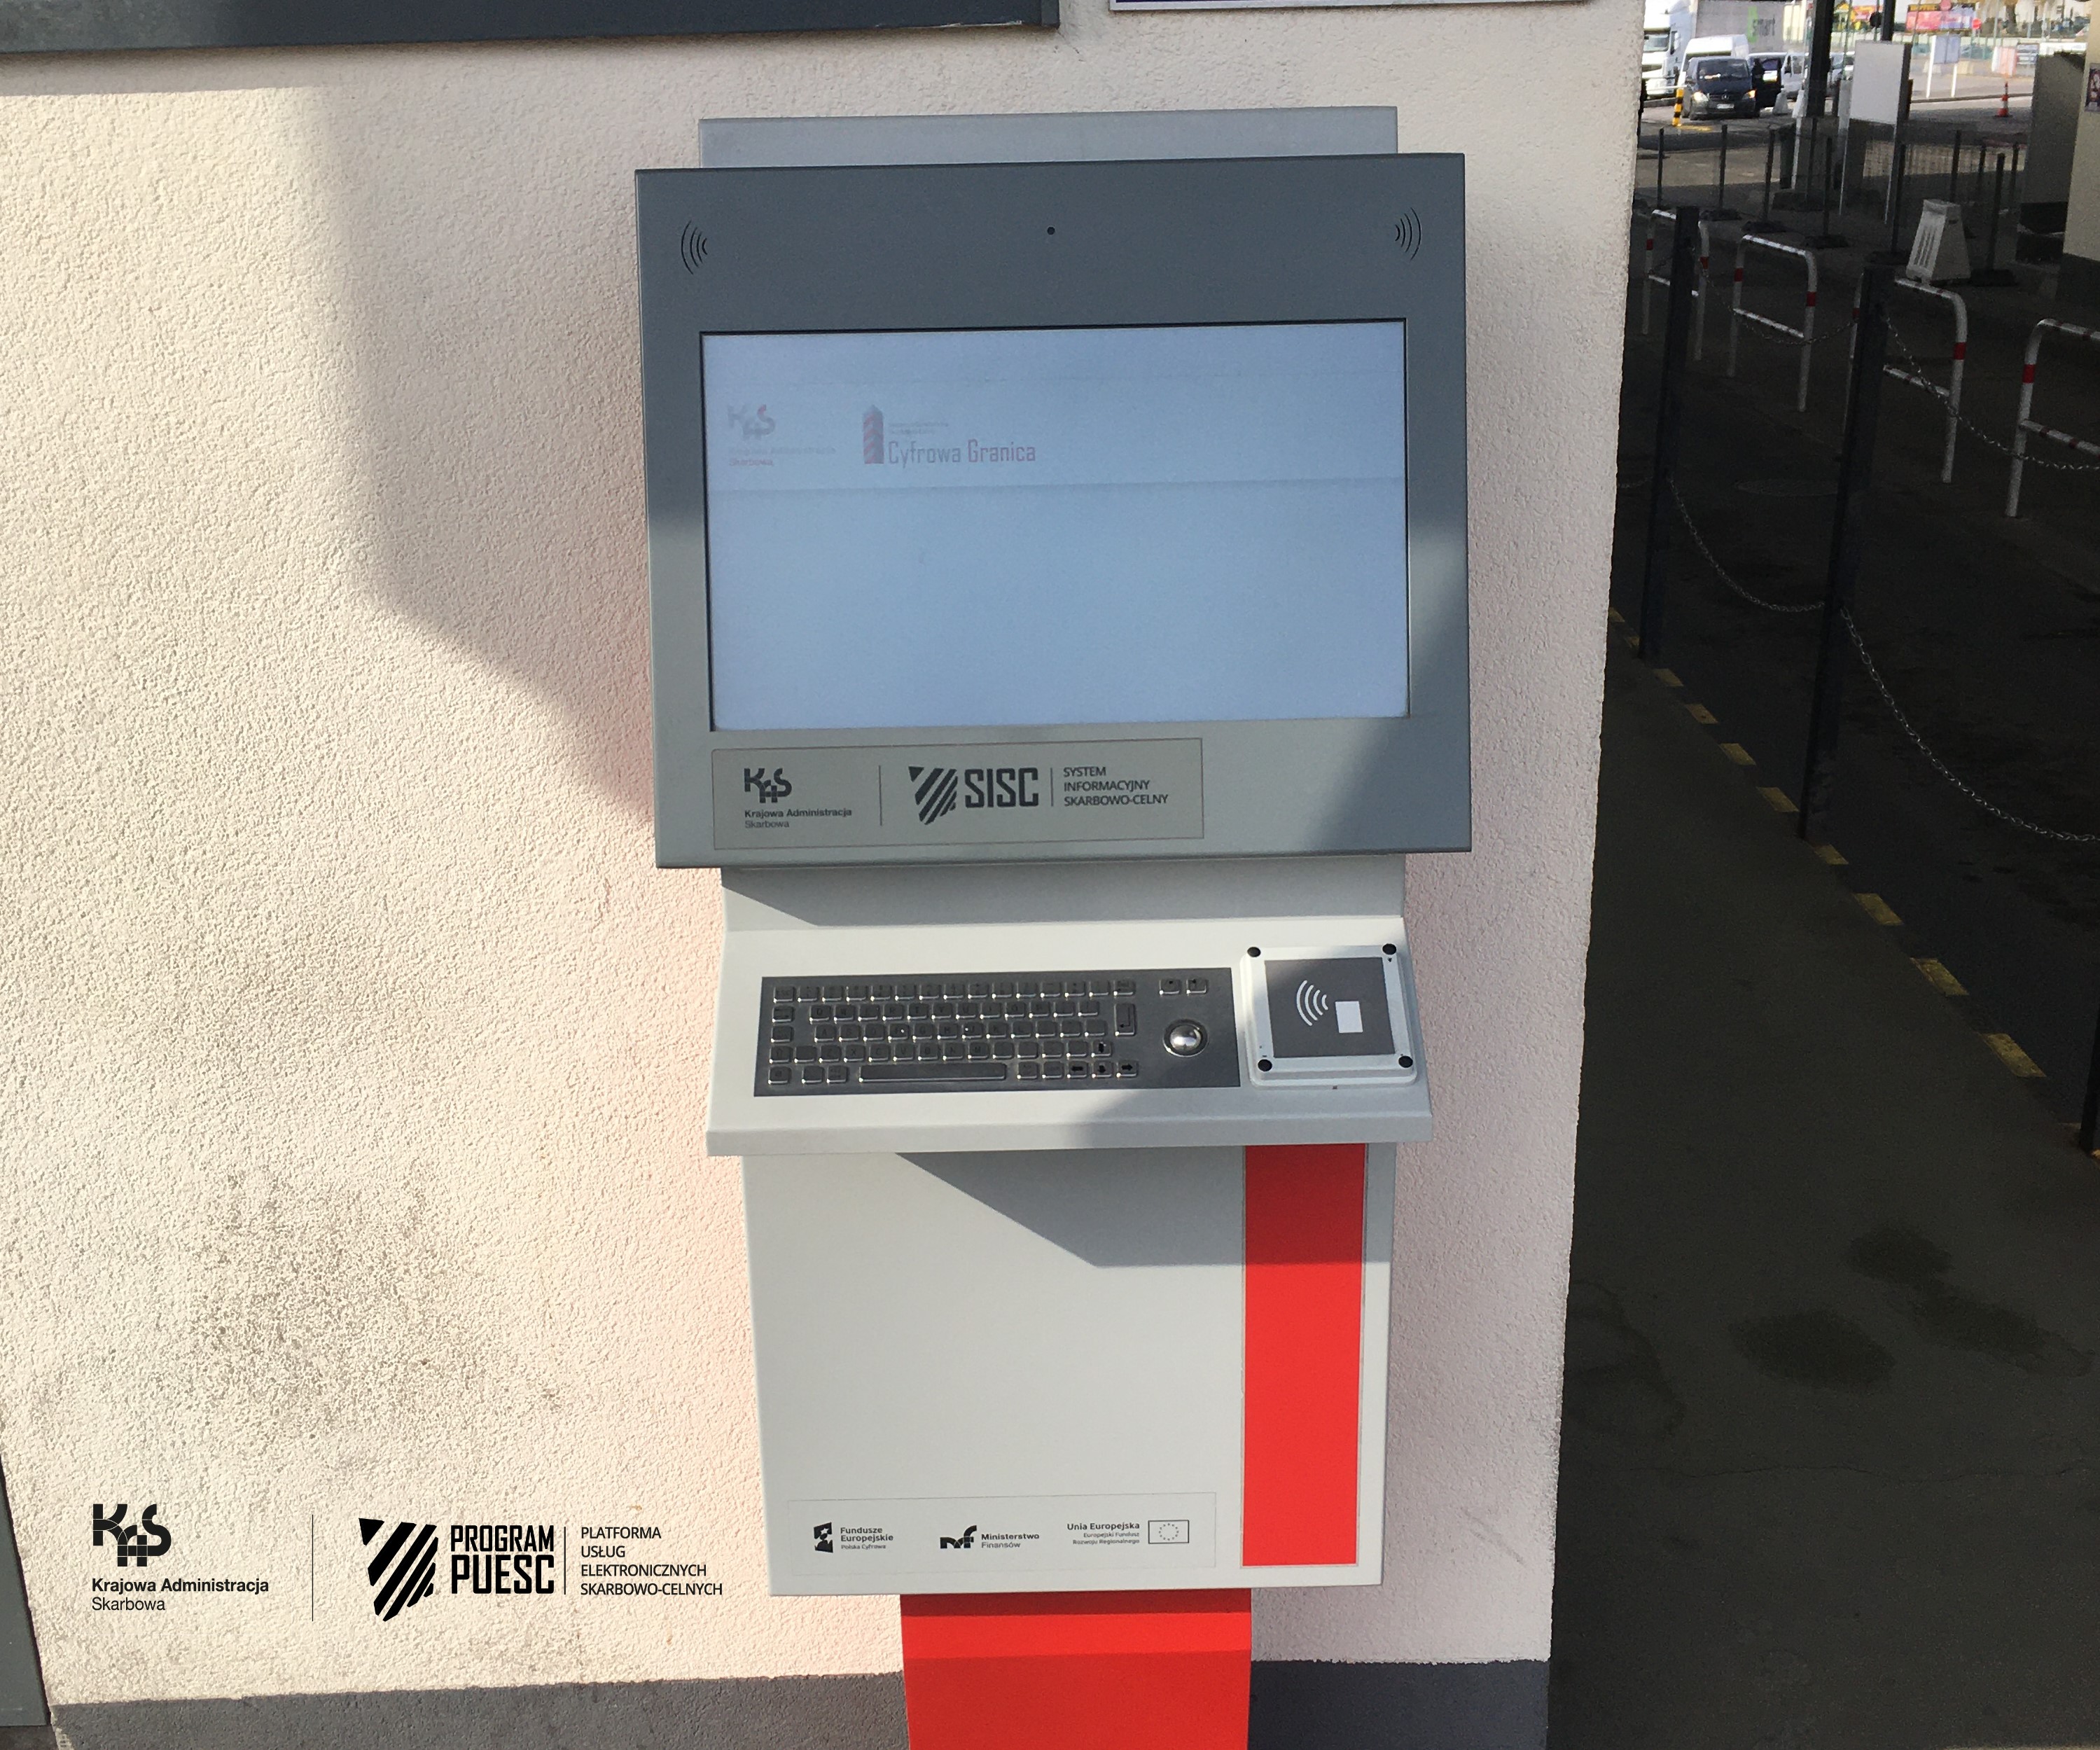 The second type of kiosk - external kiosk within the border crossing point. The device is placed on the wall of the building, consisting of a monitor, keyboard and card reader, on which logos are placed: National Revenue Administration, European Funds Digital Poland, Tax and Customs Information System, Ministry of Finance, European Union European Regional Development Fund.